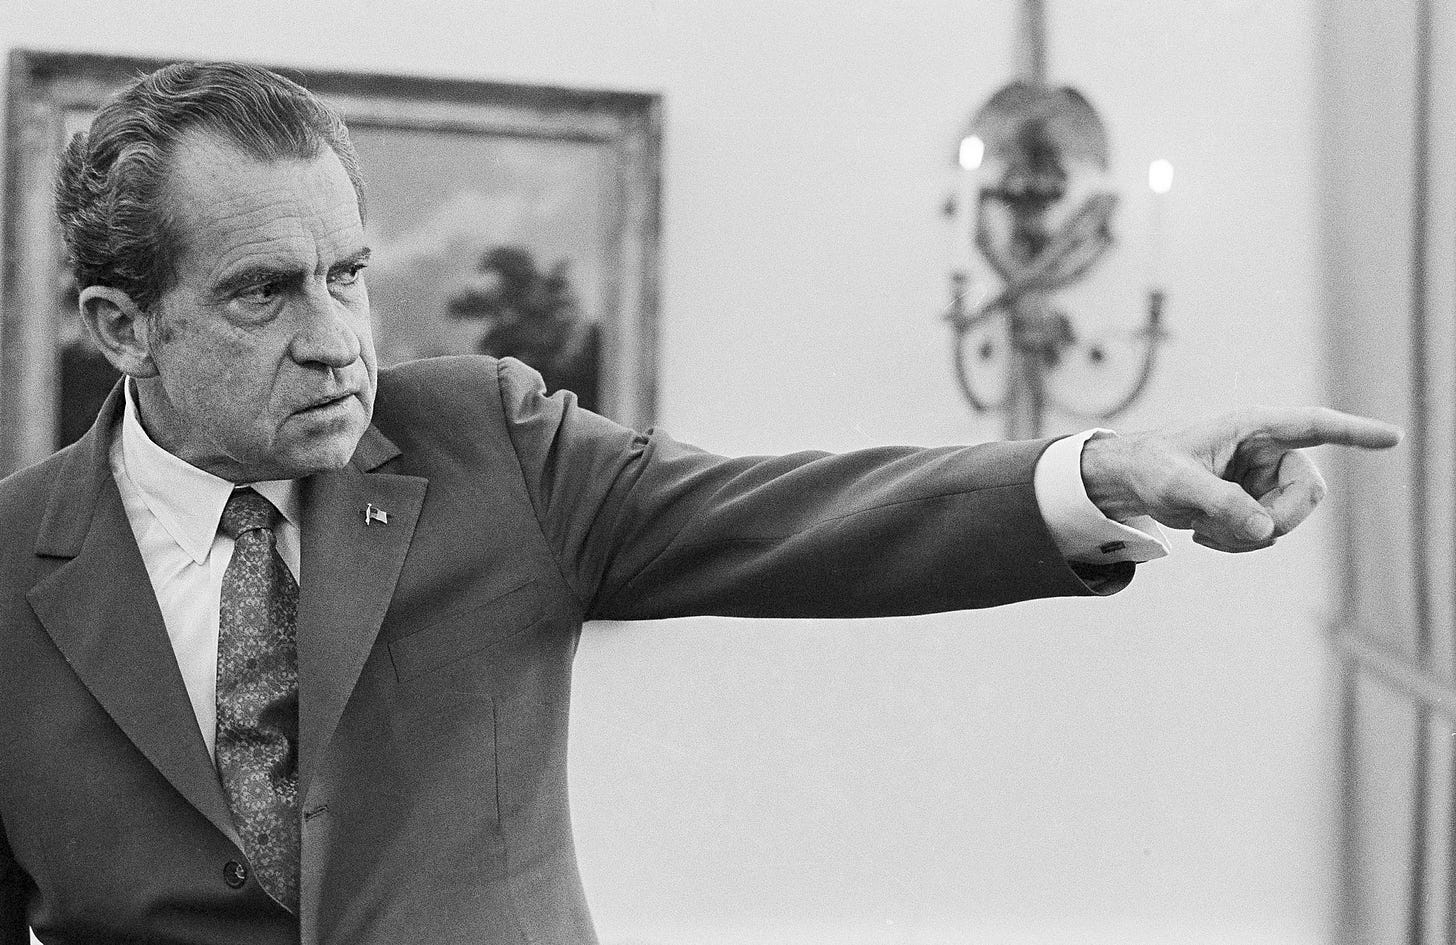 Richard Nixon at the White House in 1973 the year he ordered the firing of the special prosecutor investigating Watergate.